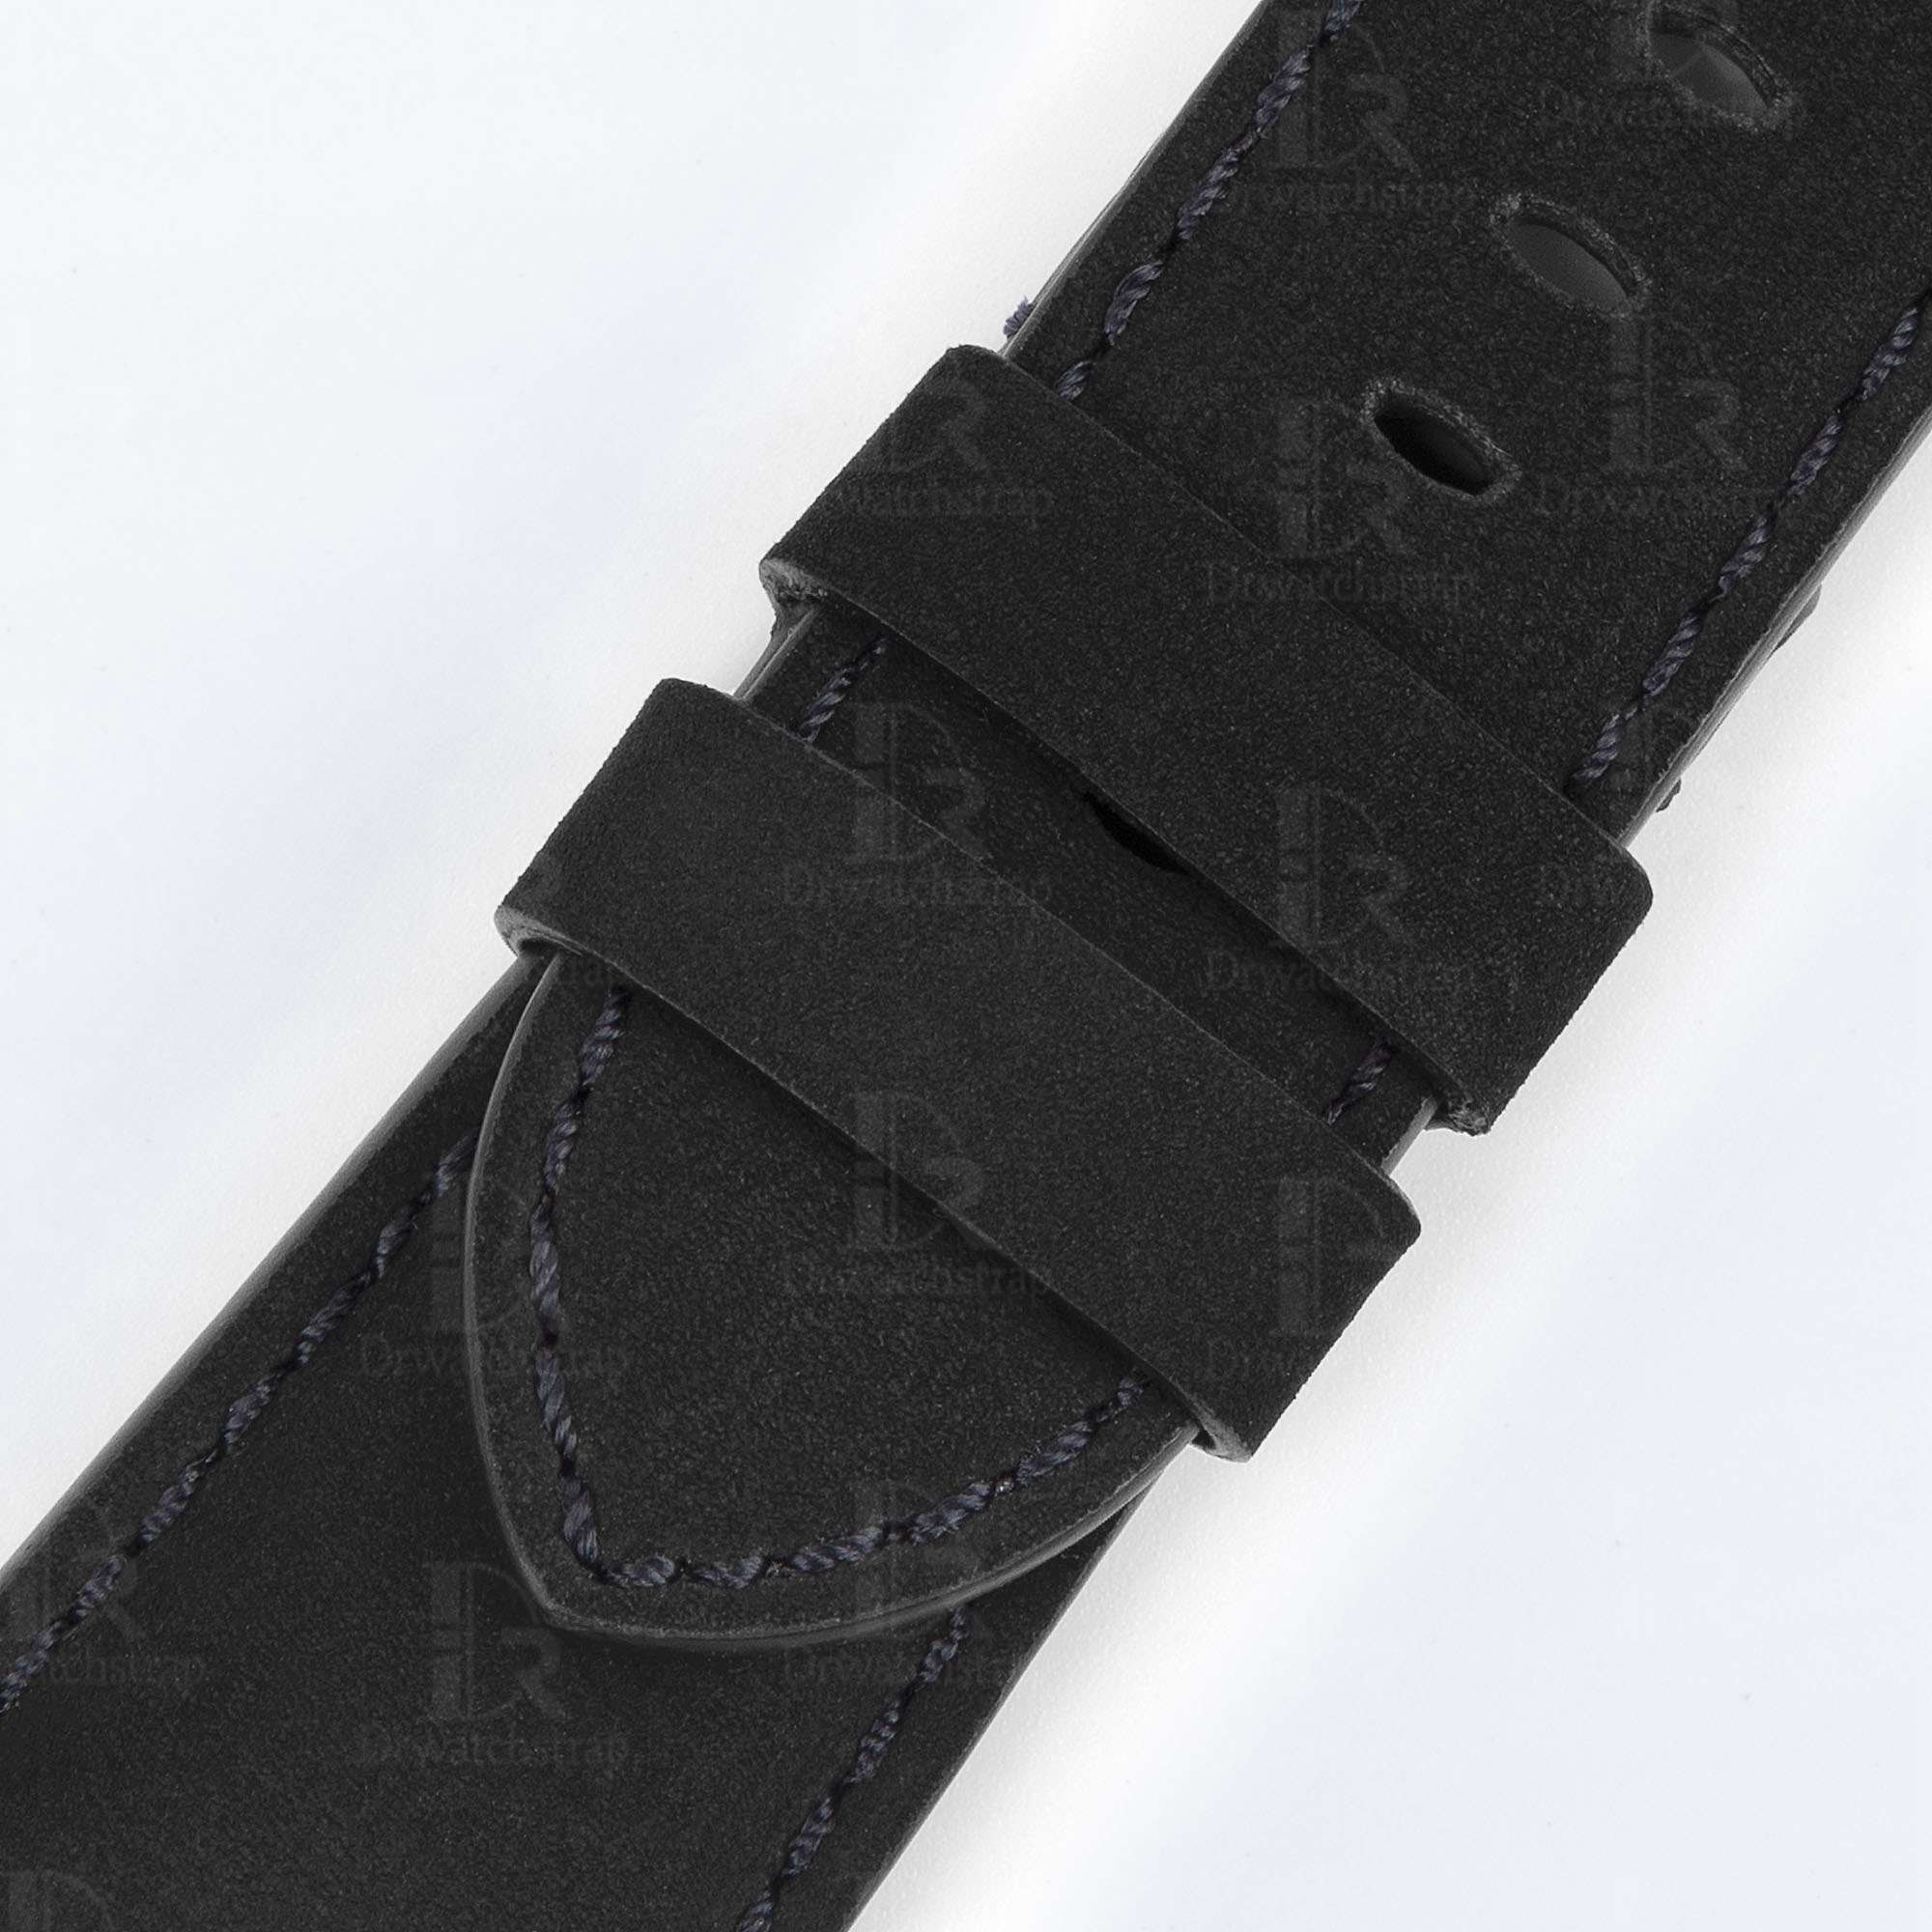 Custom OEM Premium calf material black leather Panerai strap 24mm 26mm 22mm & watch band replacement for Panerai Luminor Due Radiomir luxury watches for sale - Shop the best quality calfskin watch straps and watchbands from DR Watchstrap online at a low price